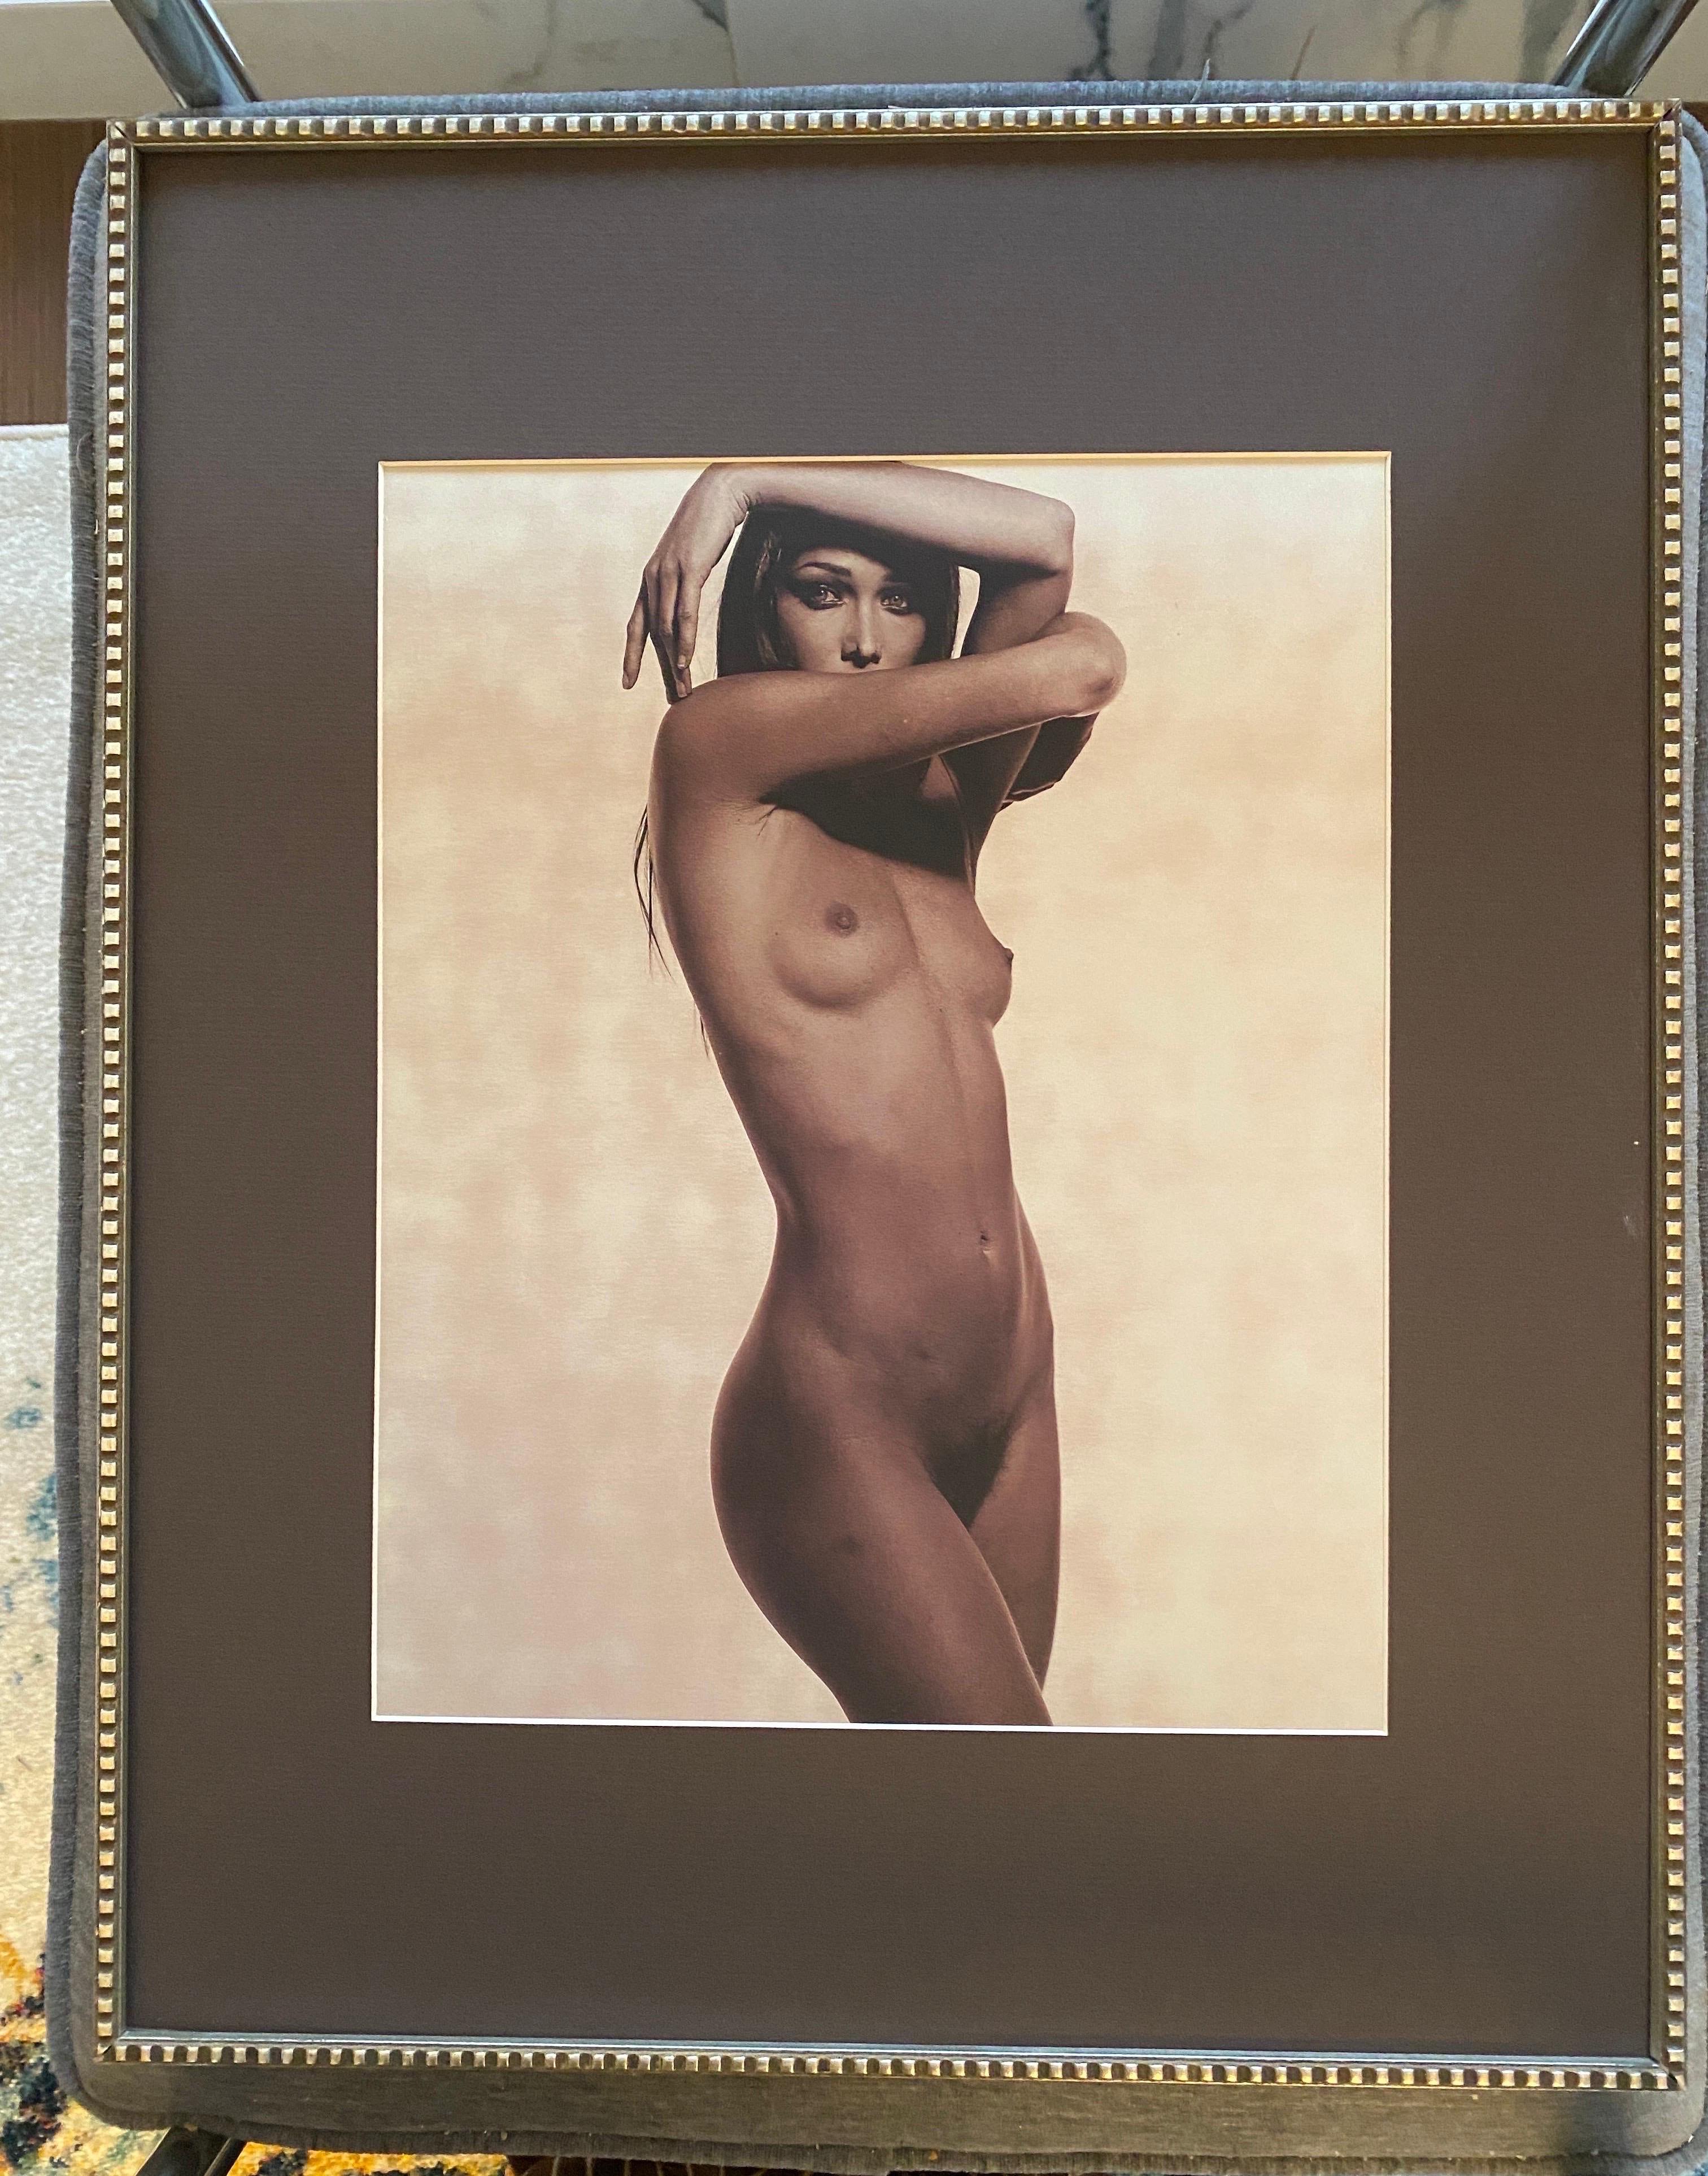 Karl Lagerfeld photograph of Karla Bruni, 1997. Ms. Bruni was a French supermodel, successful recoding artist and also became the First Lady of France. 

This beautiful female nude of Ms. Bruni was included in a boxed series of photograph